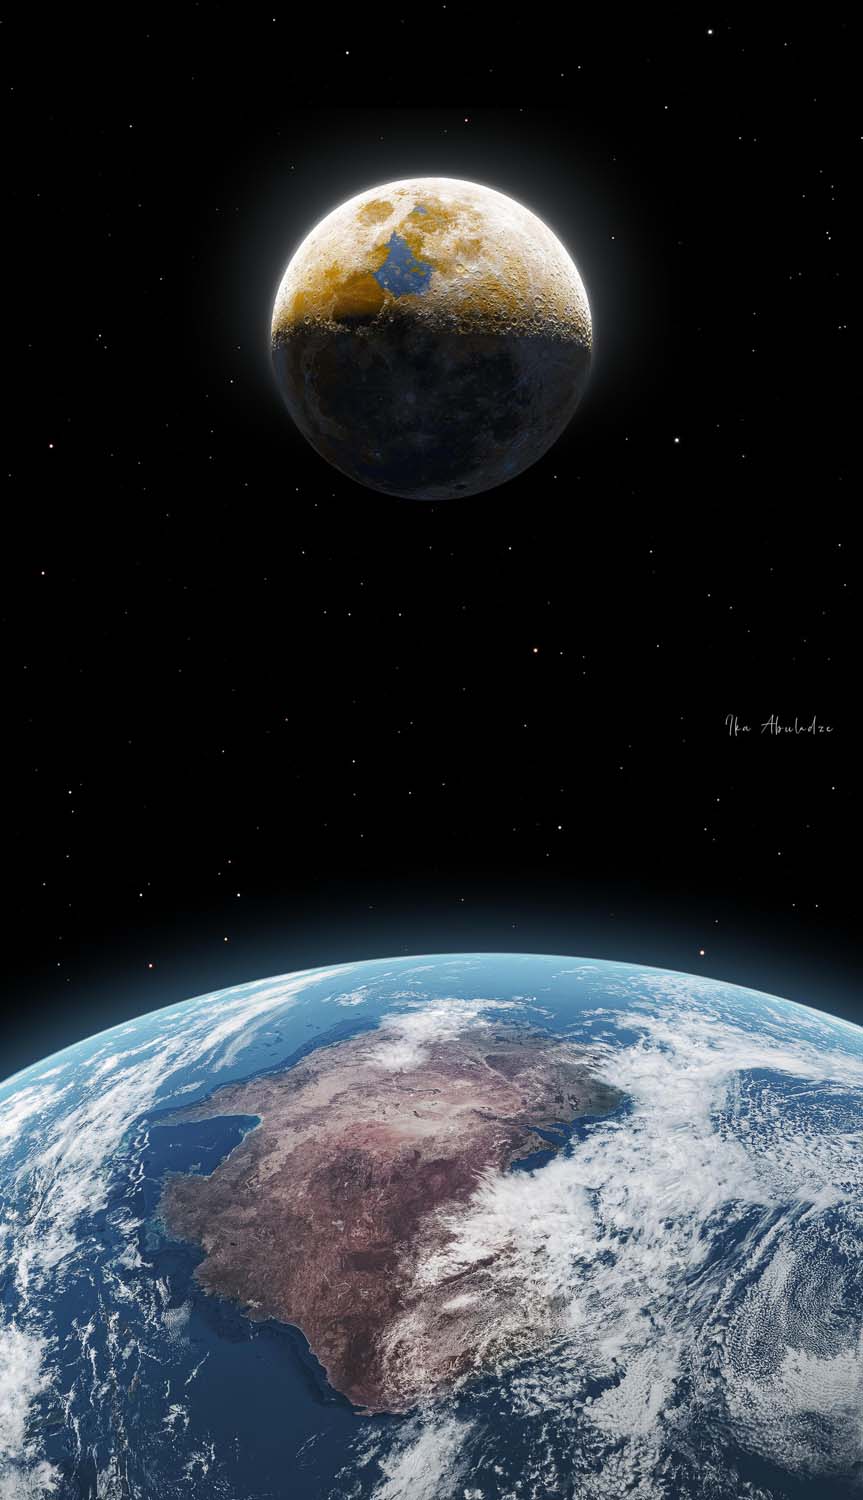 Earth And Moon IPhone Wallpaper HD - IPhone Wallpapers : iPhone Wallpapers